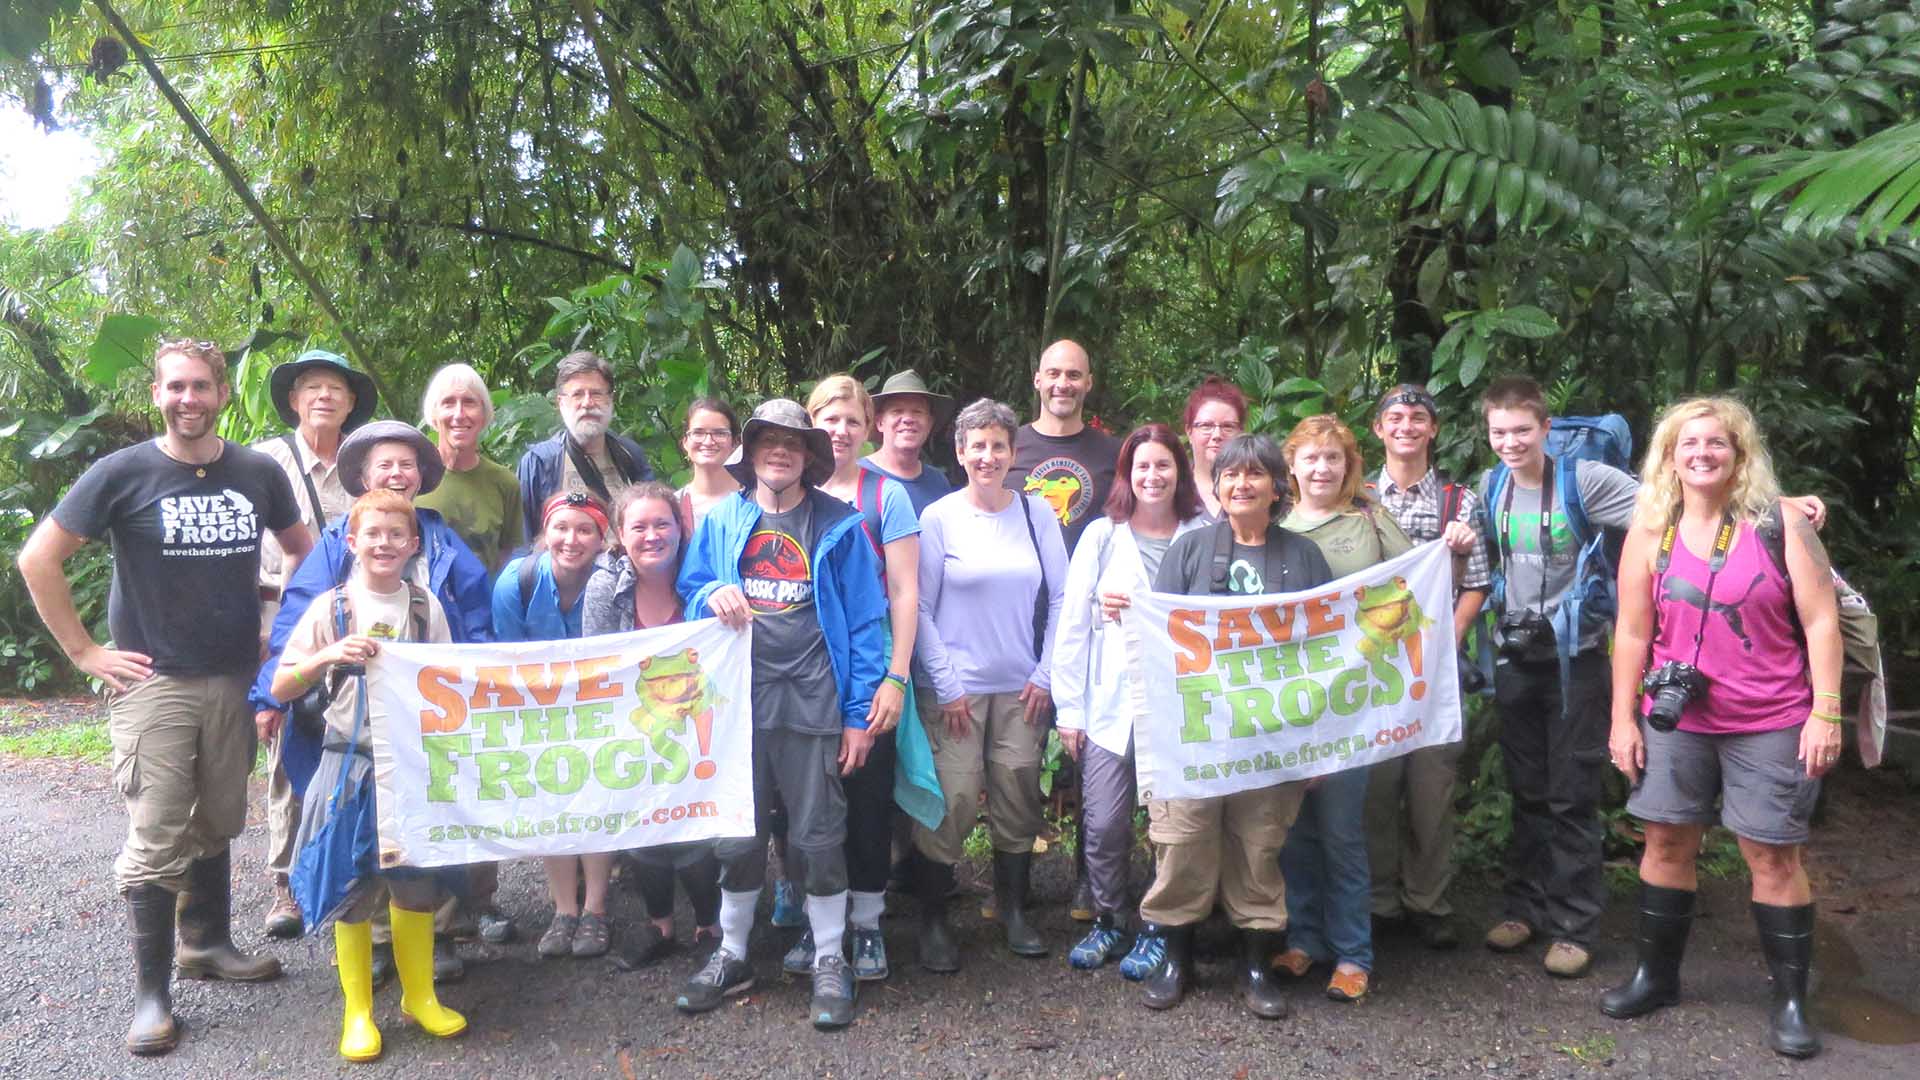 The 2017 SAVE THE FROGS! Costa Rica Ecotour